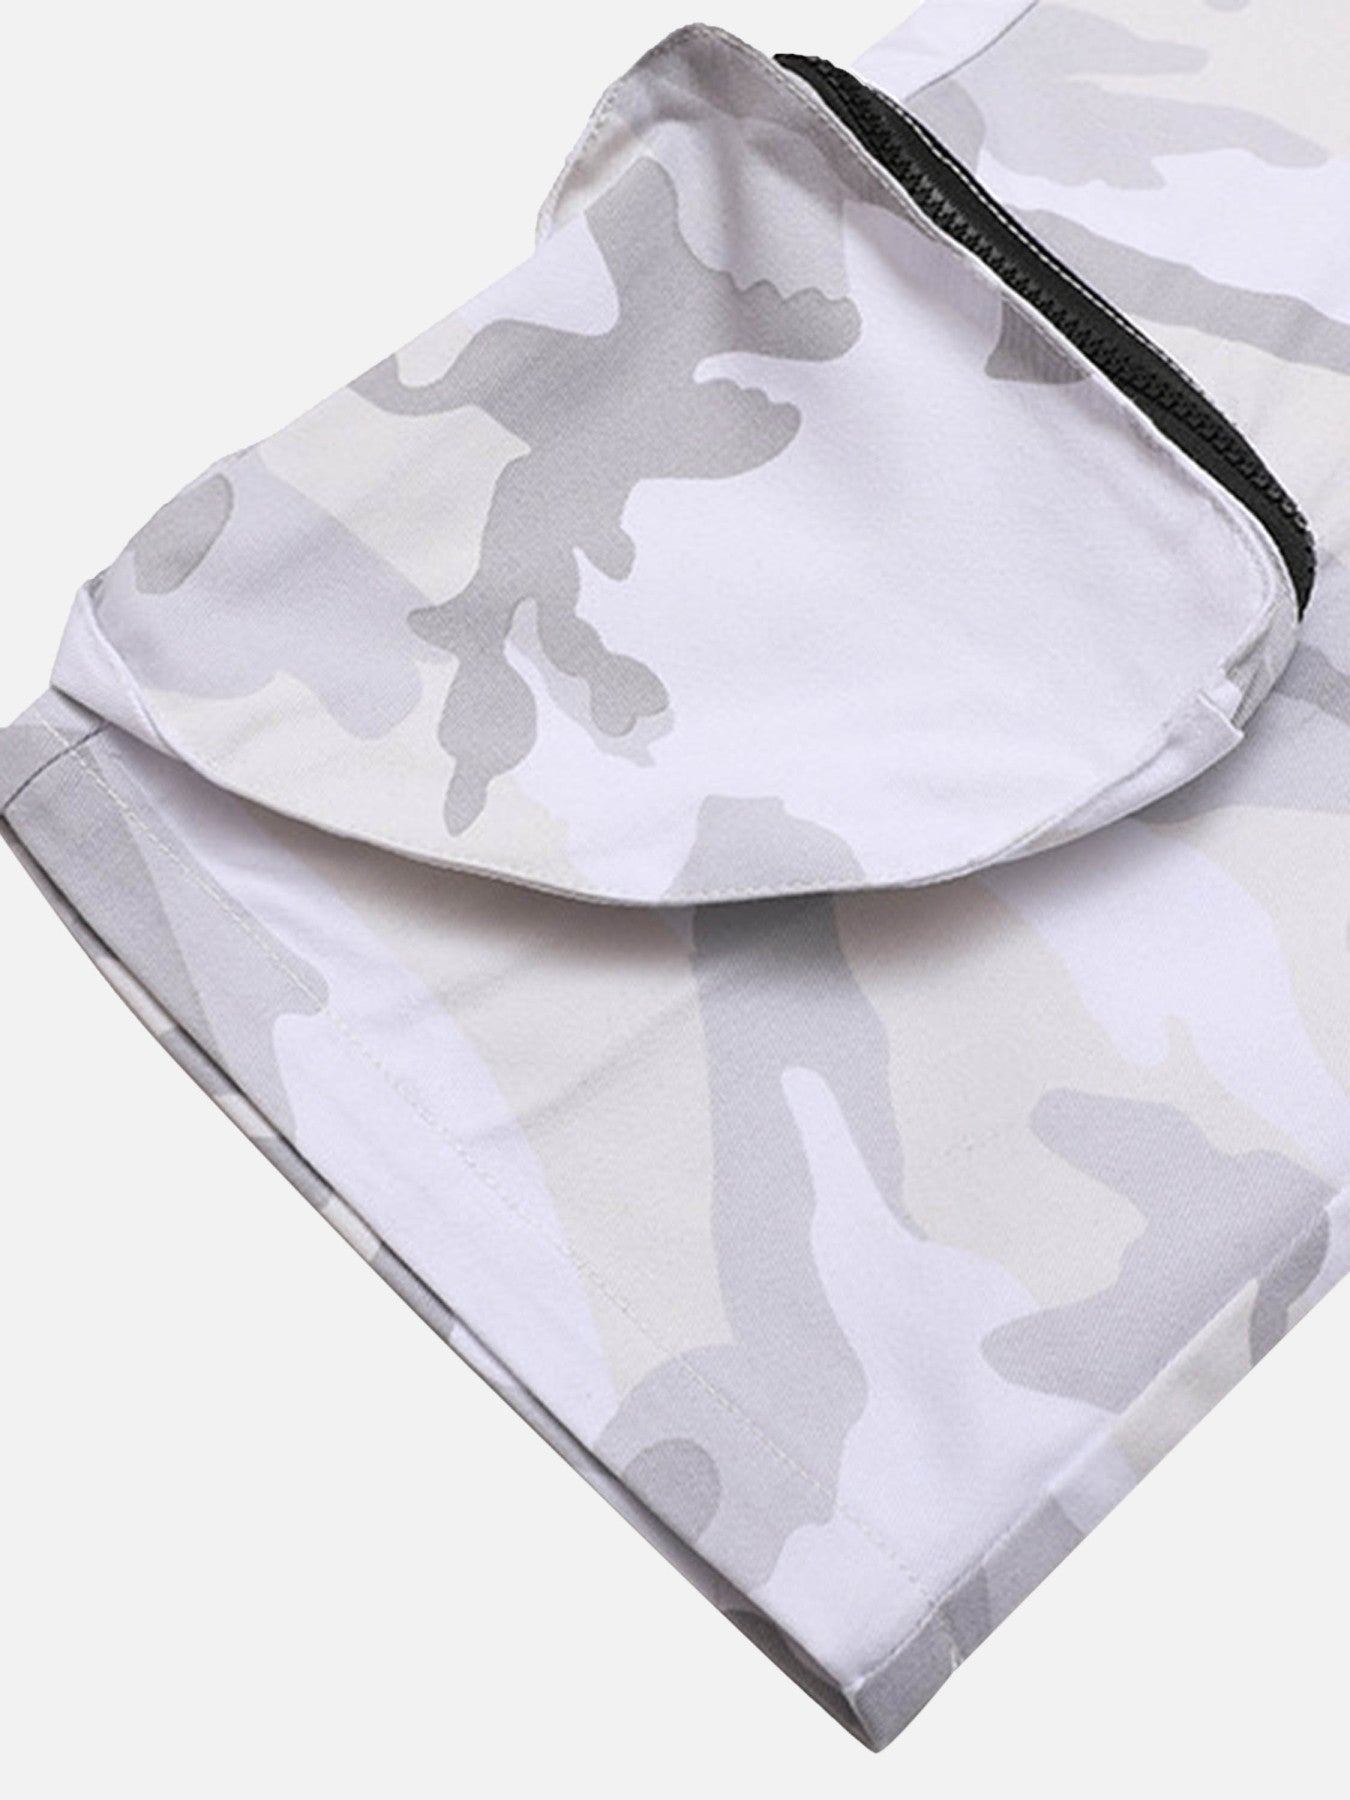 Thesupermade Camouflage Work Pants With Three-dimensional Pockets